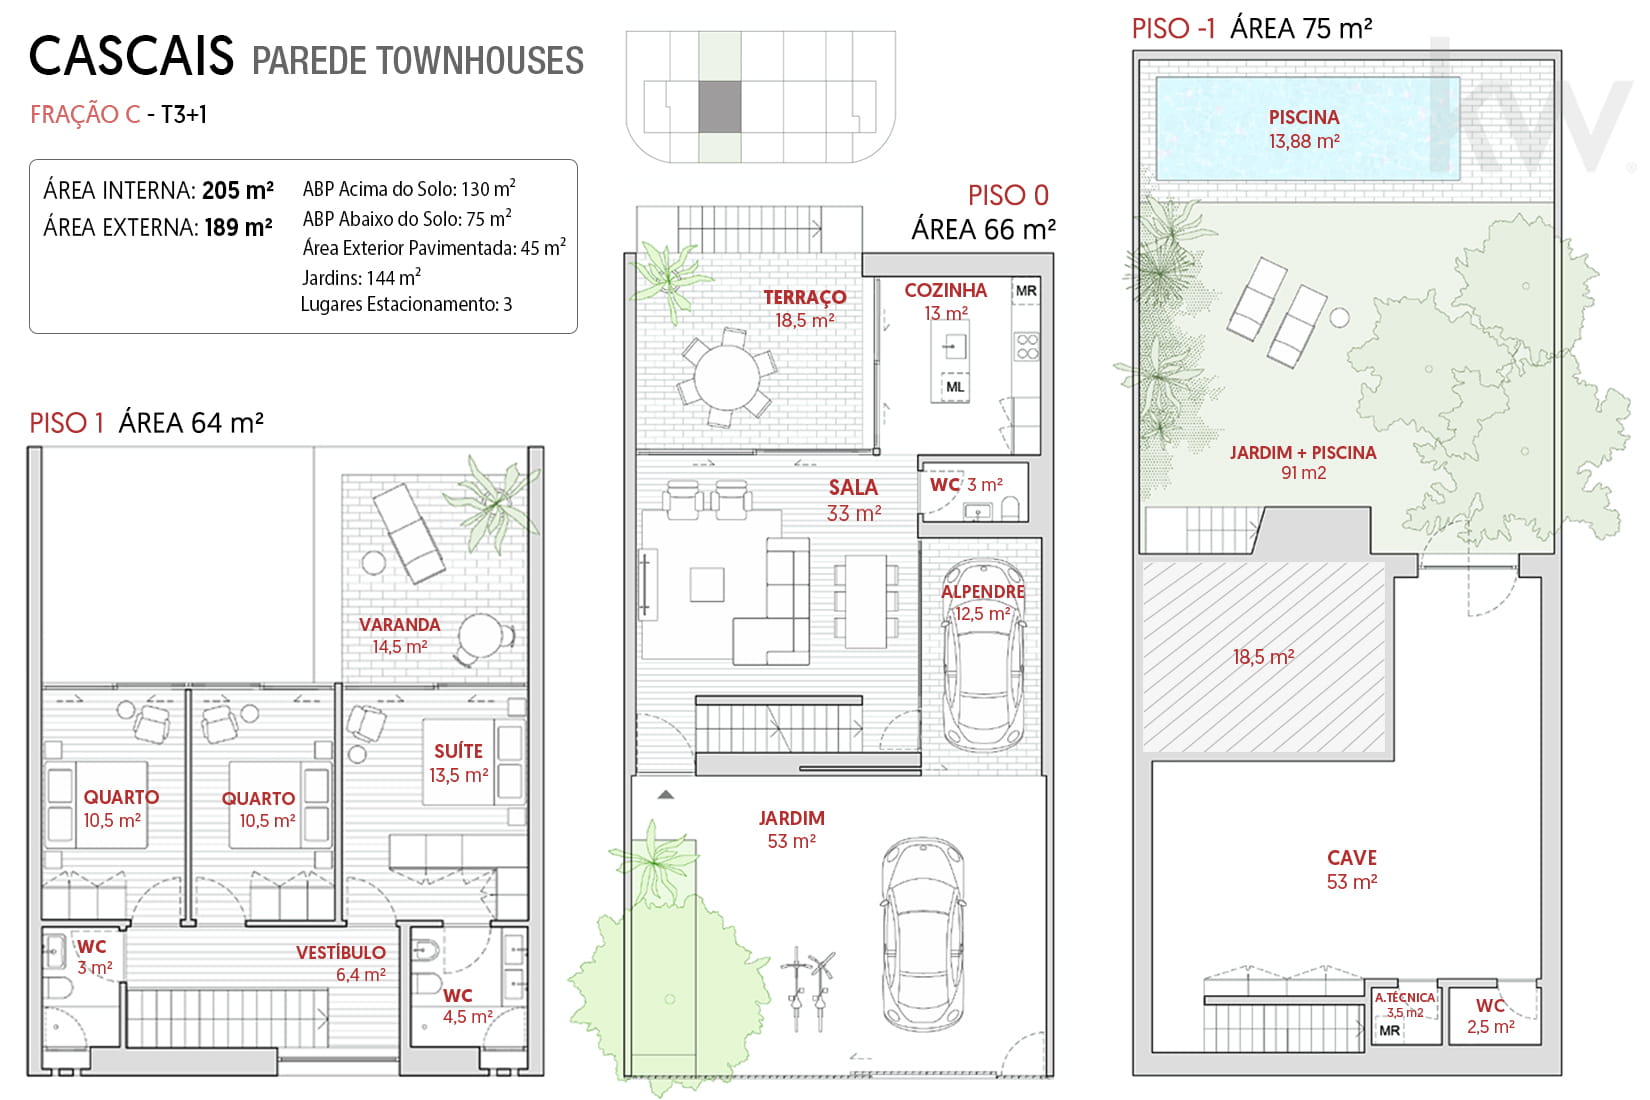 Plans of Townhouse C